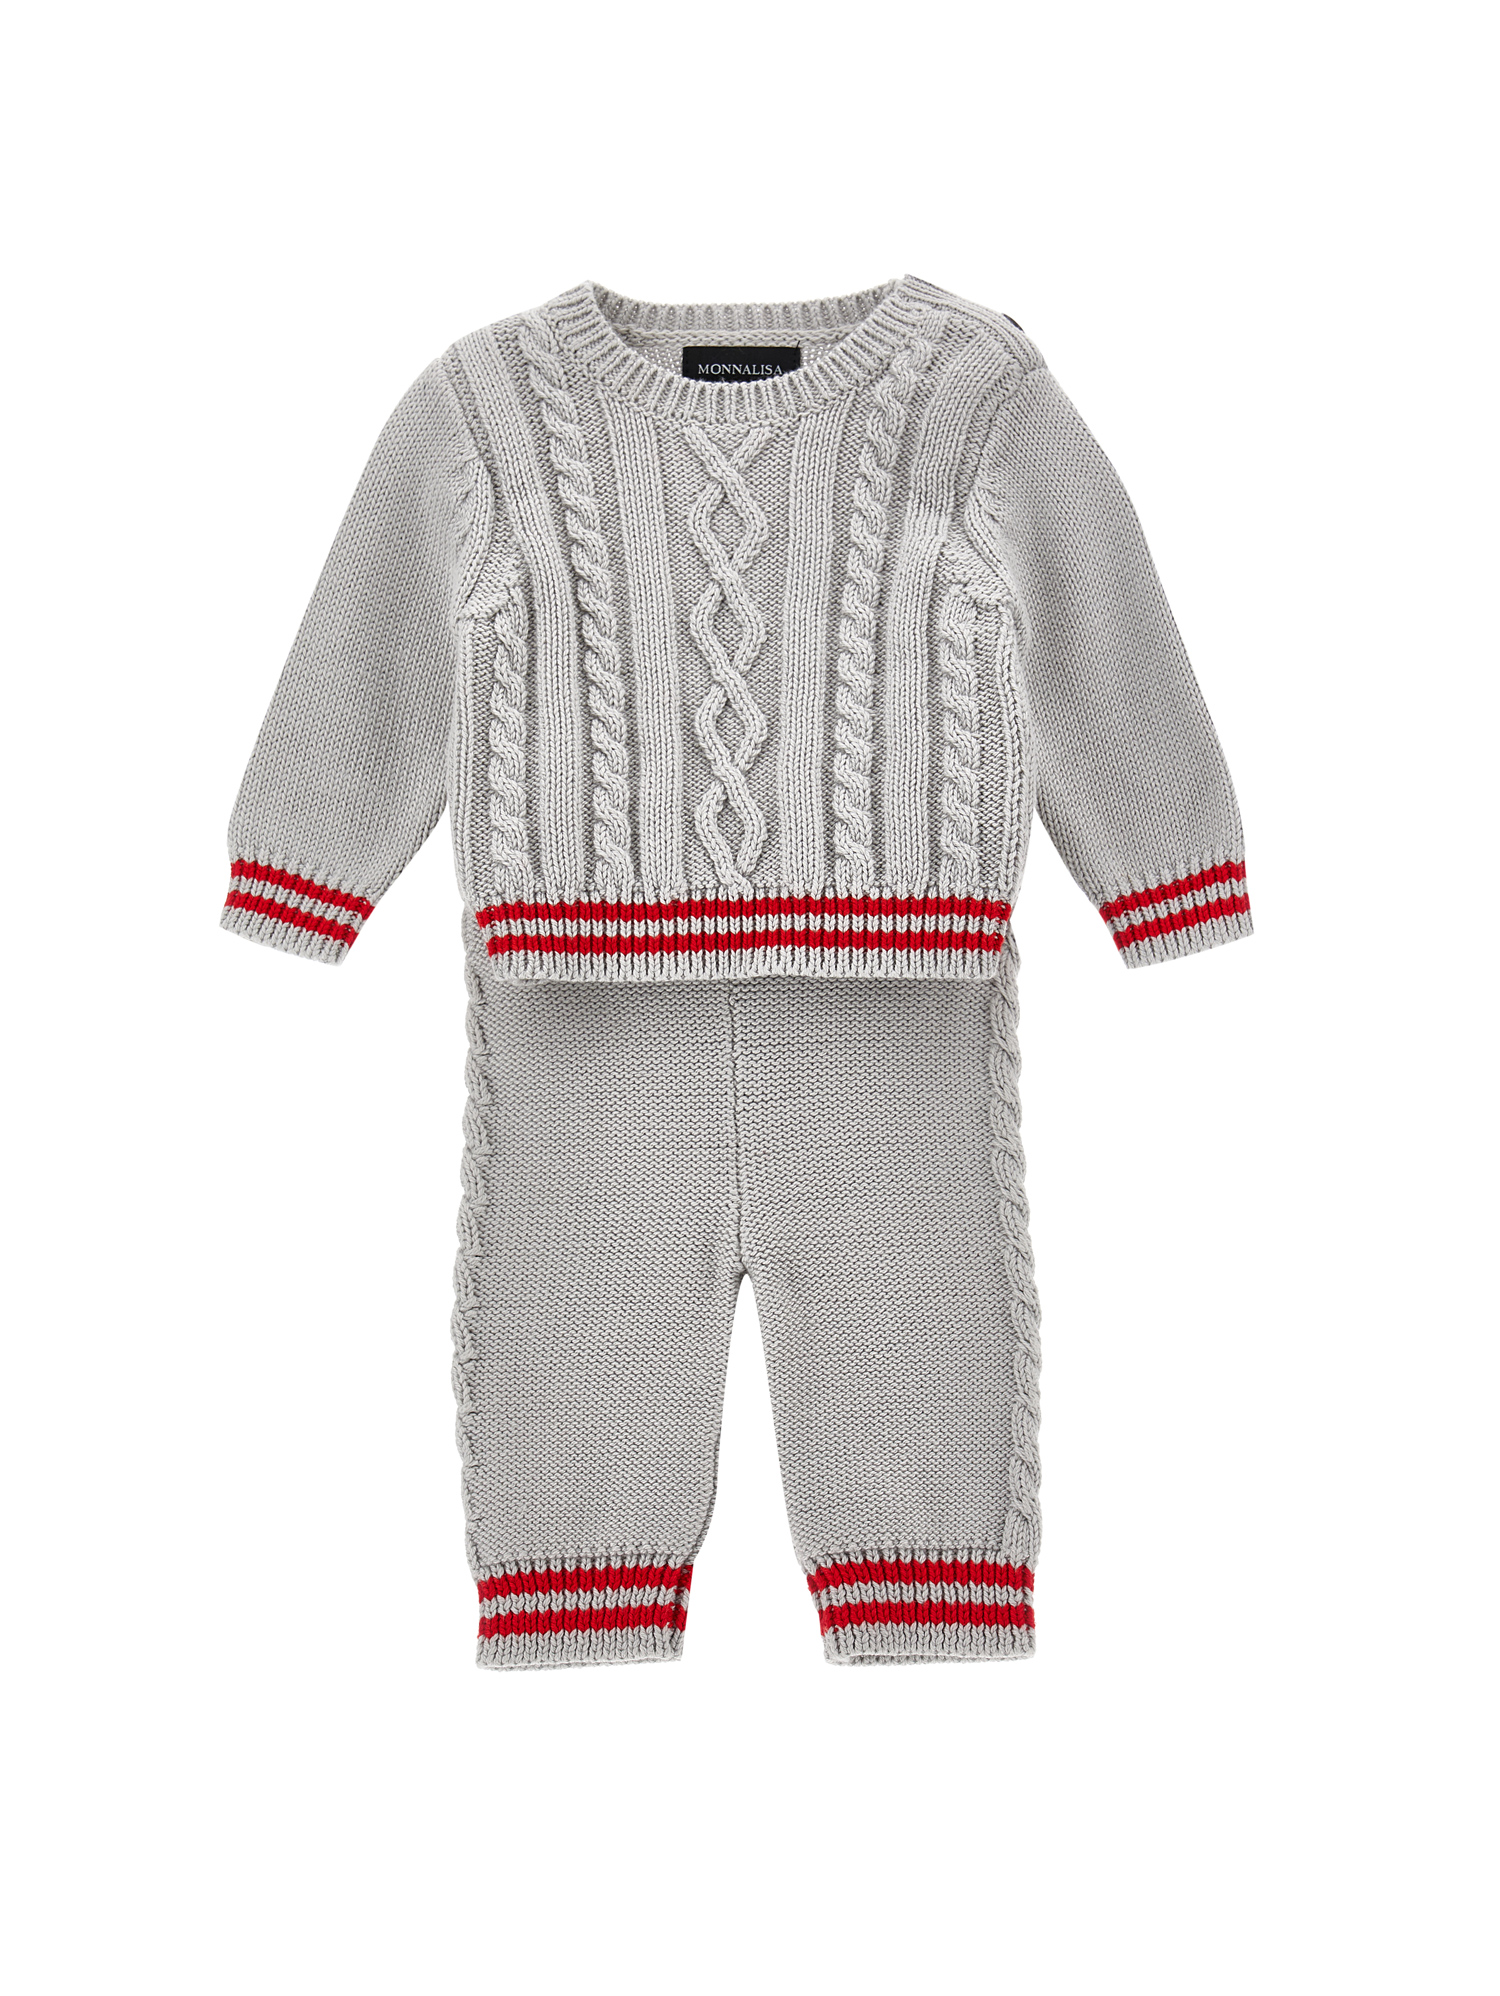 Monnalisa Babies'   Knitted Outfit In Grey + Red